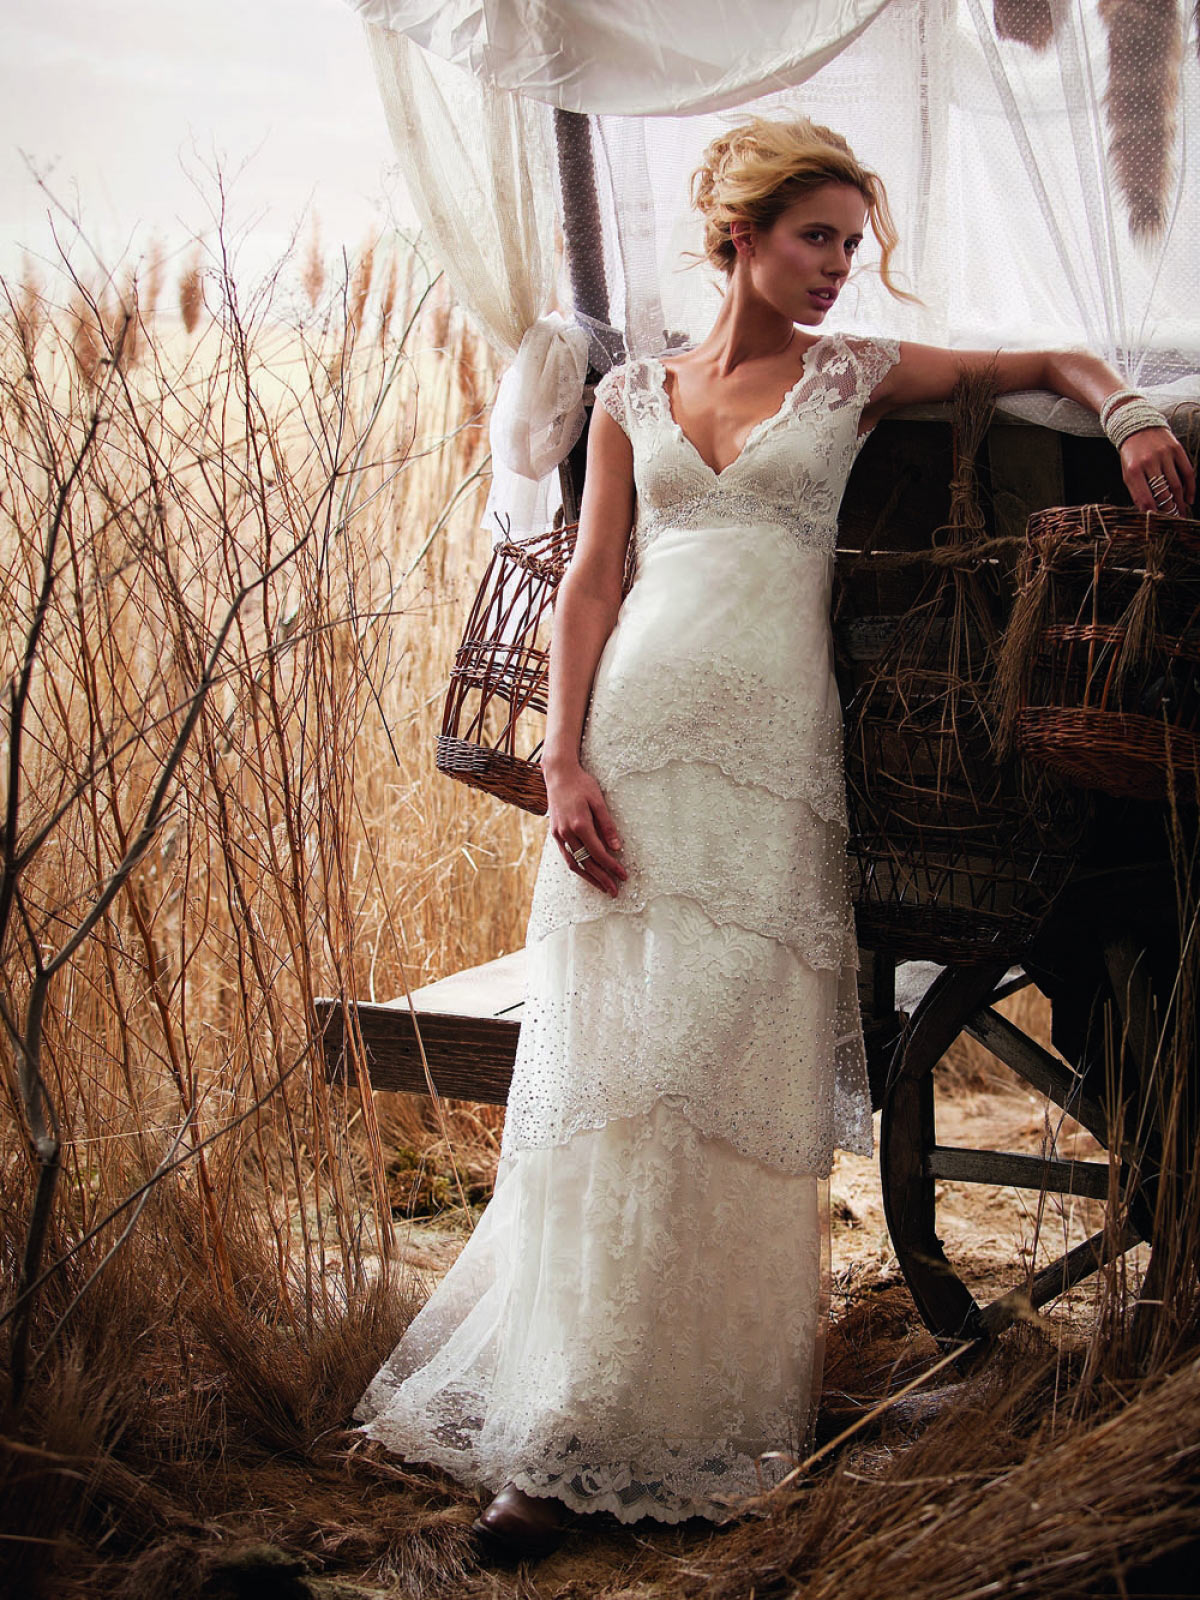 Dreamy new dresses and 10% off at The Bridal Rooms of Wellswood